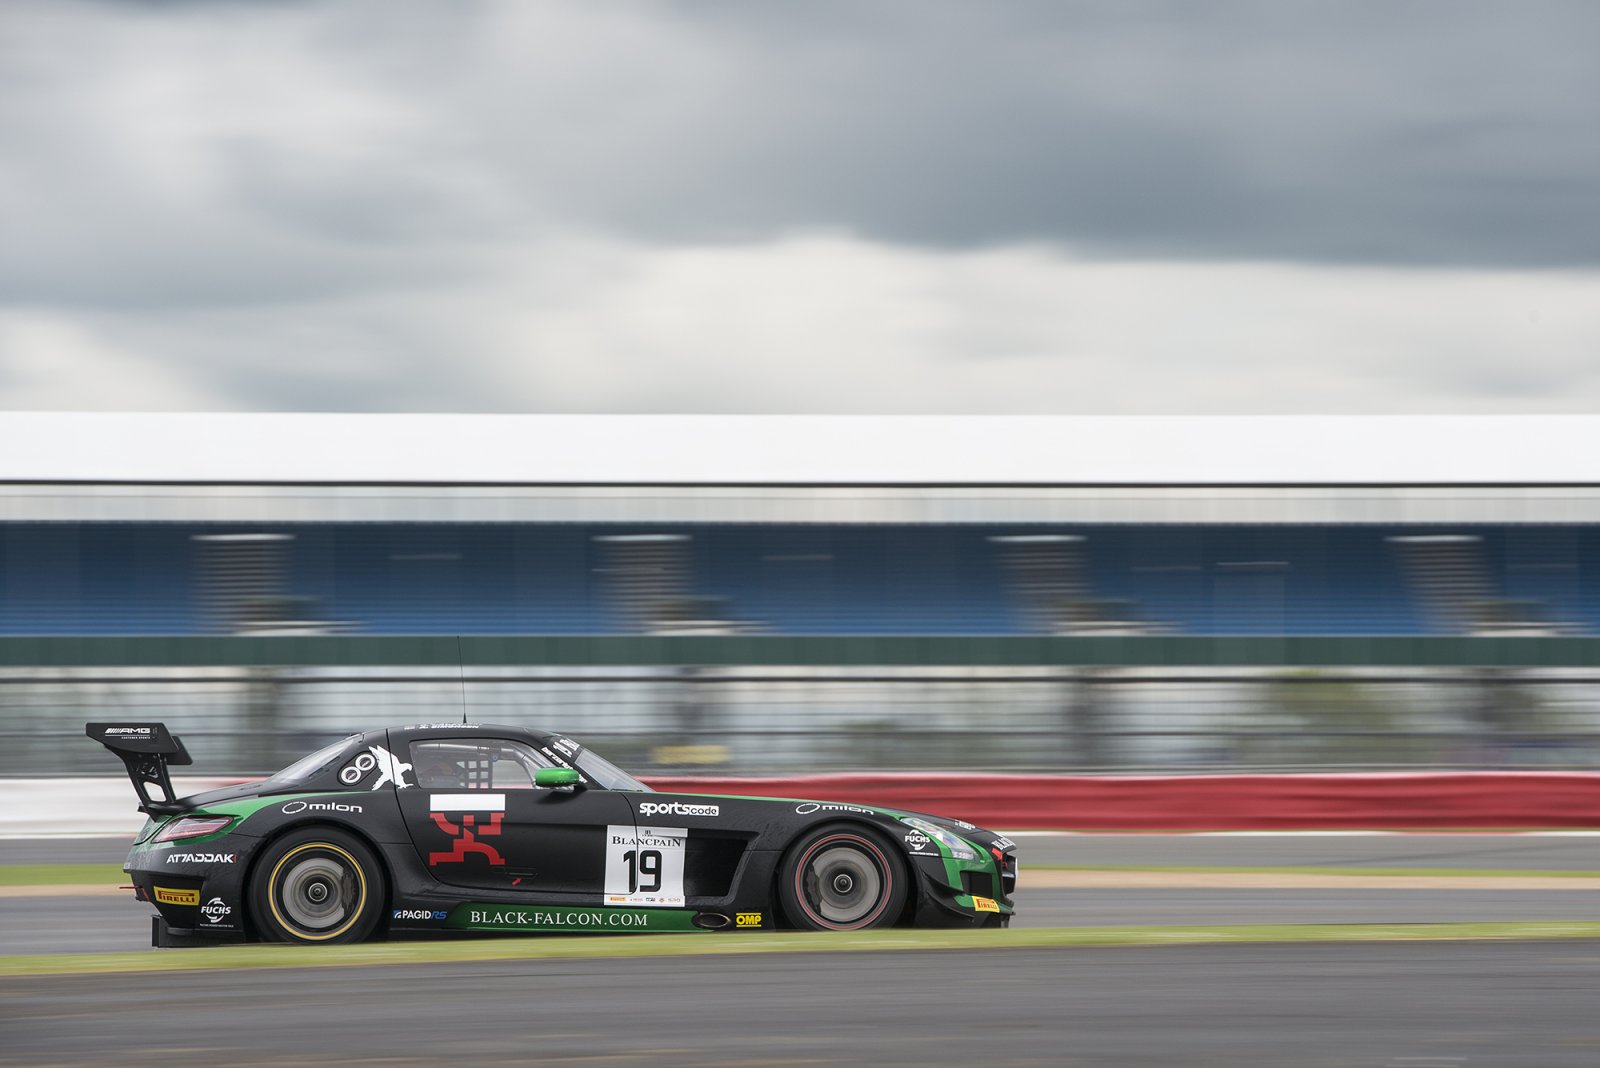 Team Black Falcon to race three cars at upcoming Total 24 hours of Spa